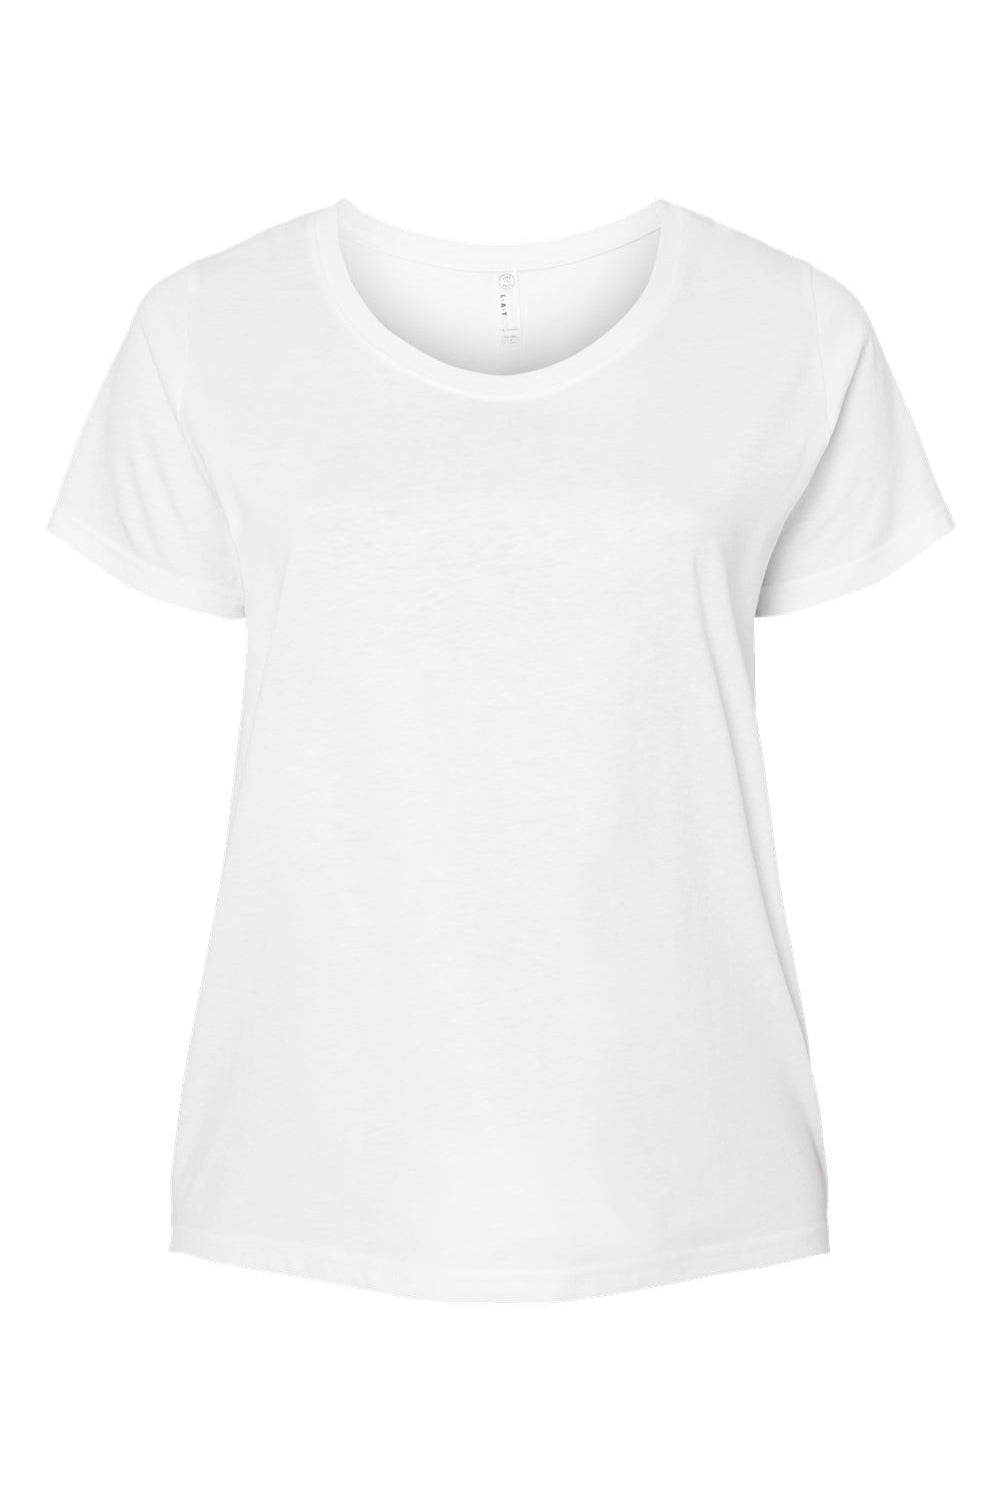 LAT 3816 Womens Curvy Collection Fine Jersey Short Sleeve Crewneck T-Shirt Blended White Flat Front